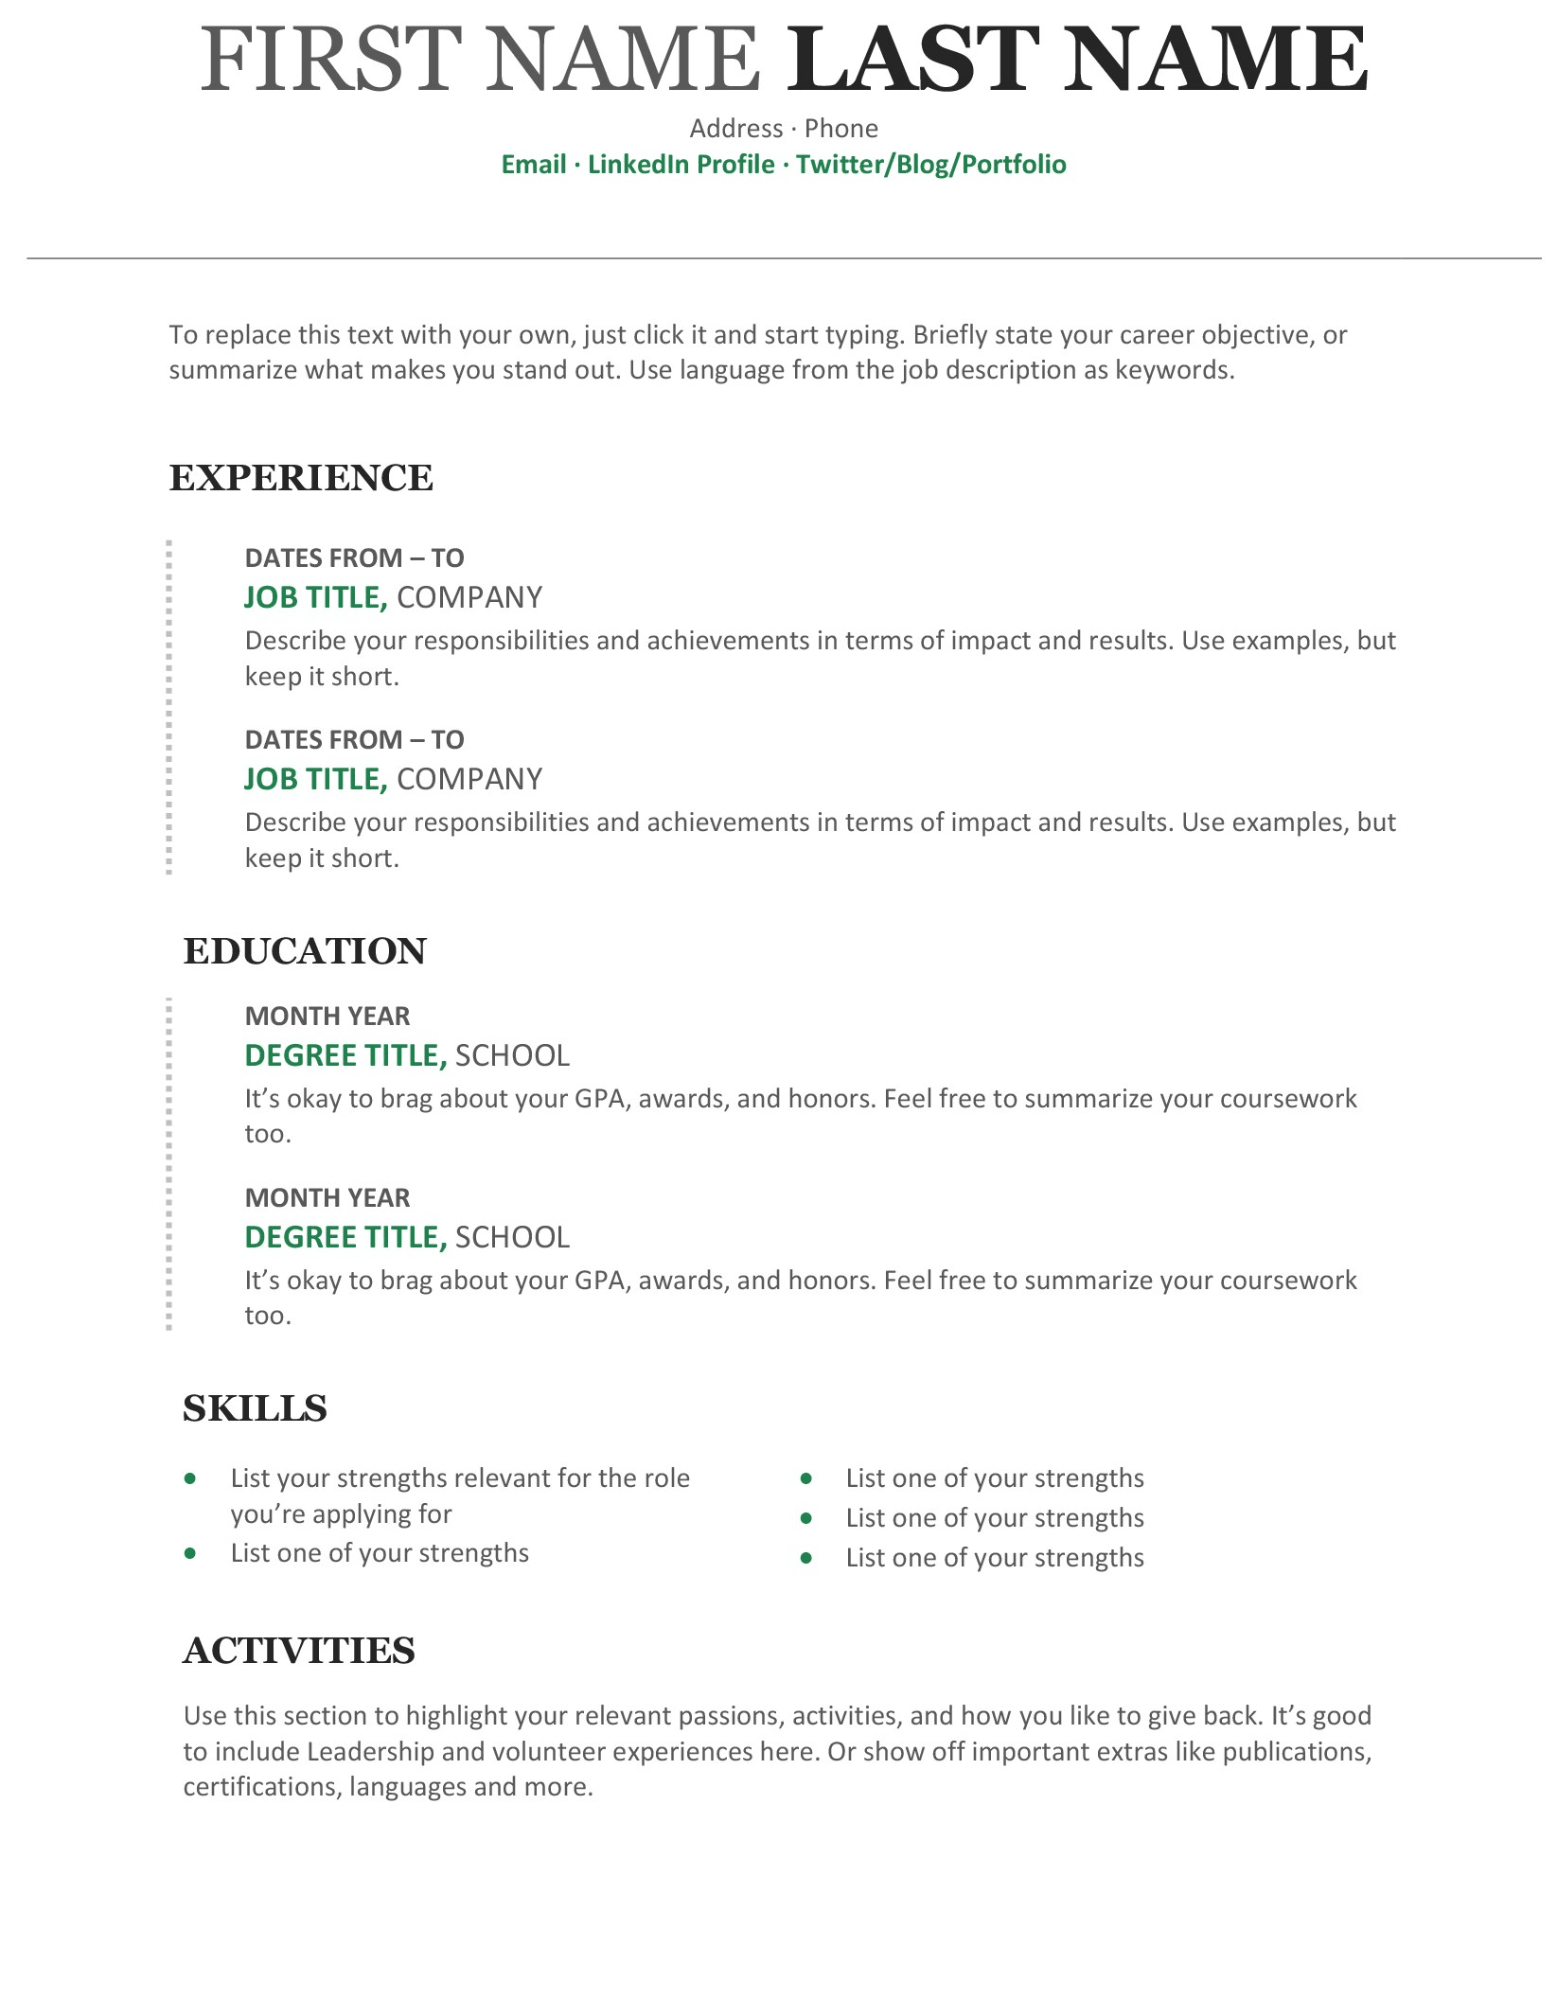 20+ Free And Premium Word Resume Templates [Download] For How To Find A Resume Template On Word